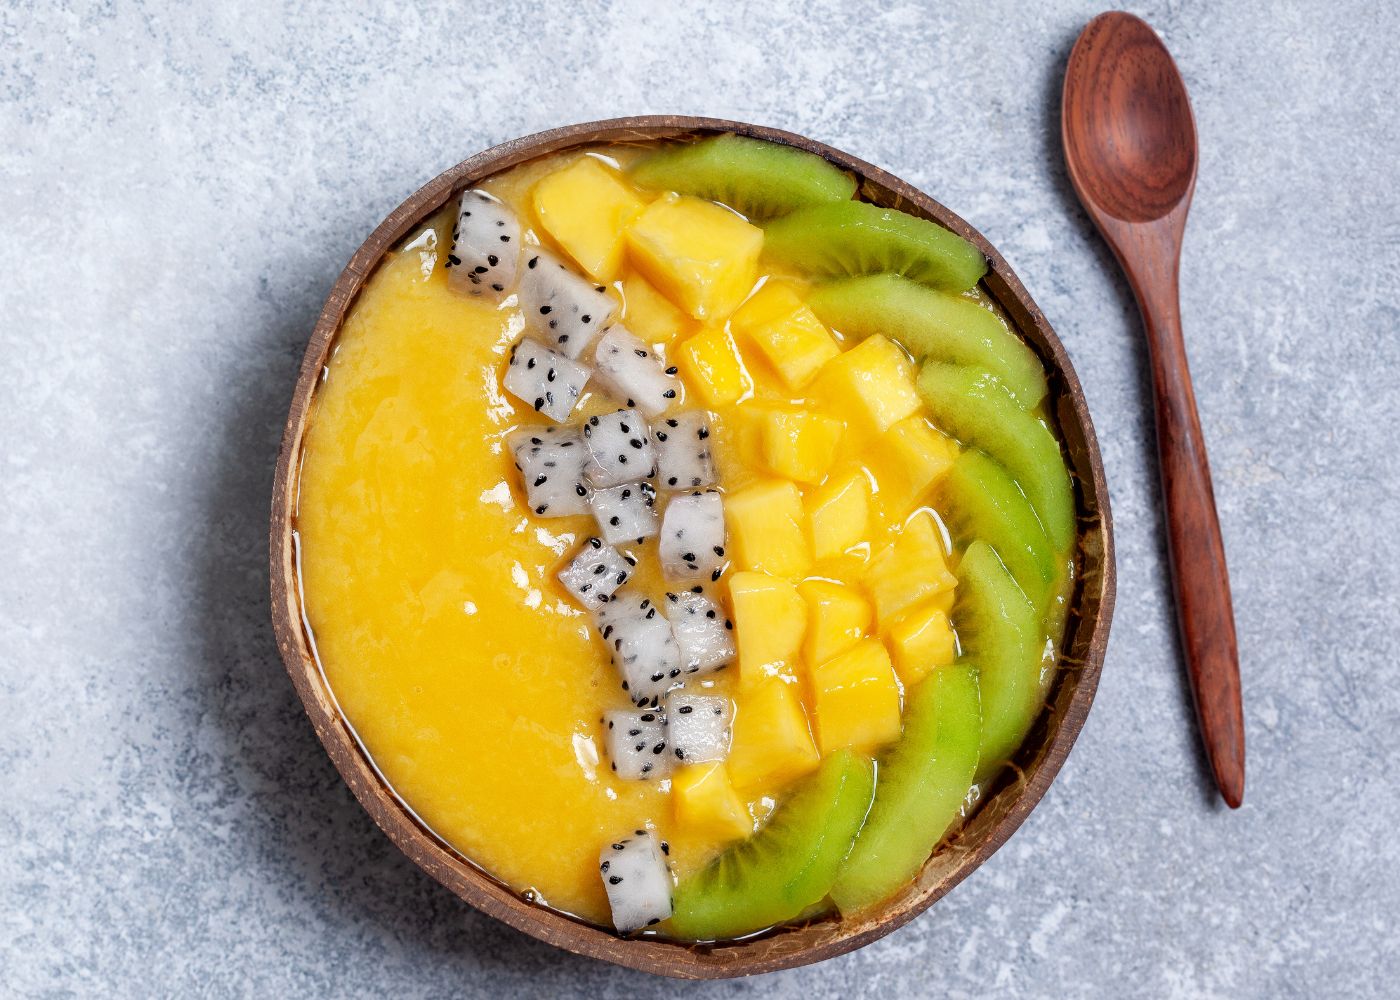 https://www.cleaneatingkitchen.com/wp-content/uploads/2022/09/smoothie-bowl-with-fresh-soft-fruits.jpg